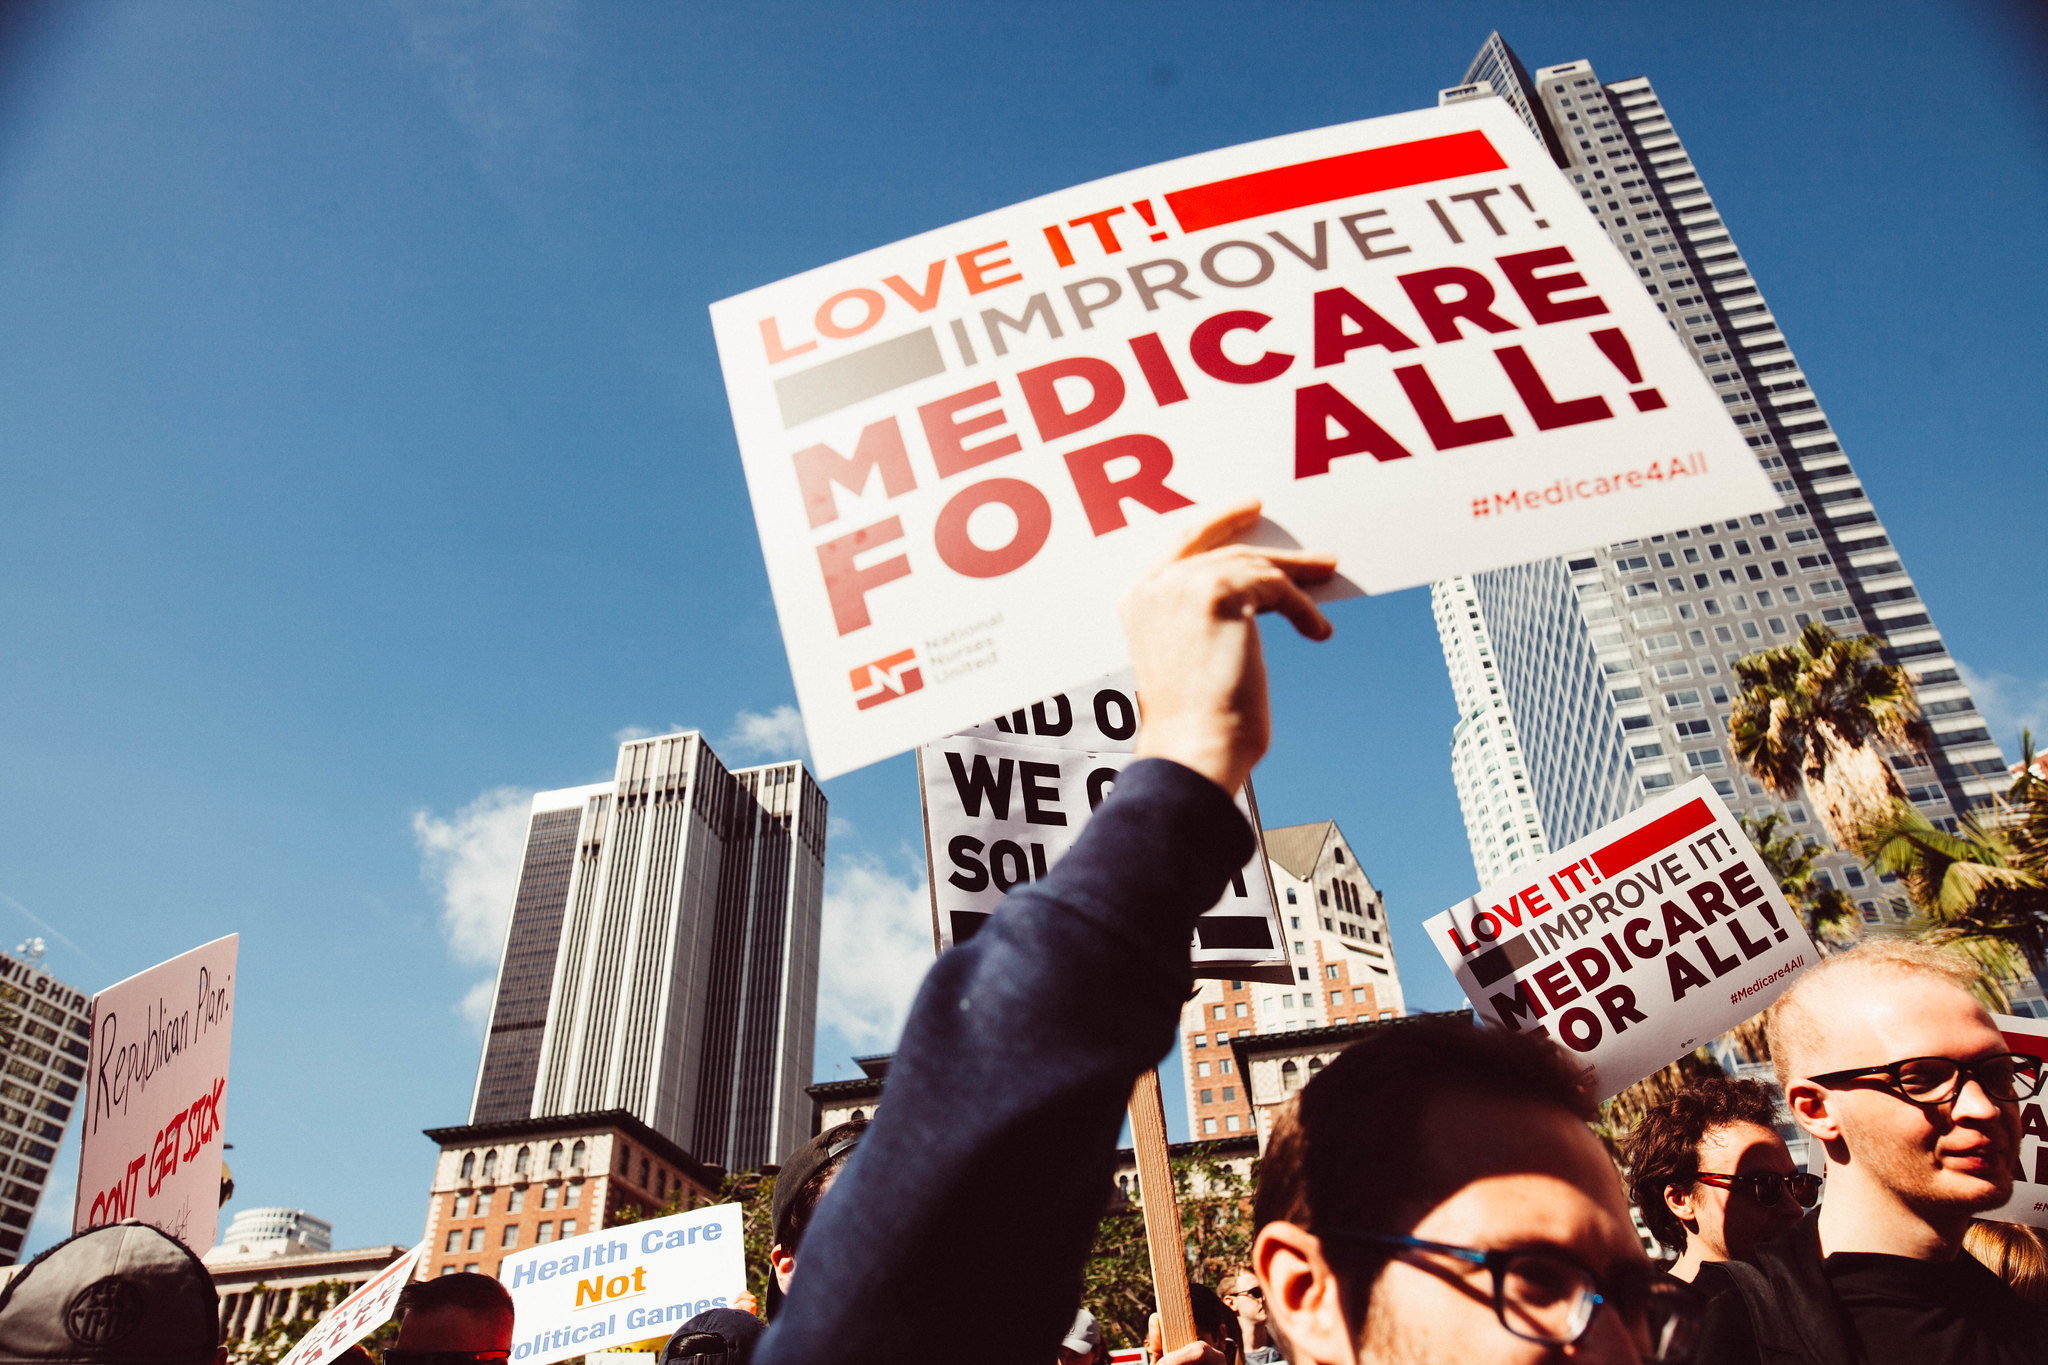 medicare for all sign at a protest